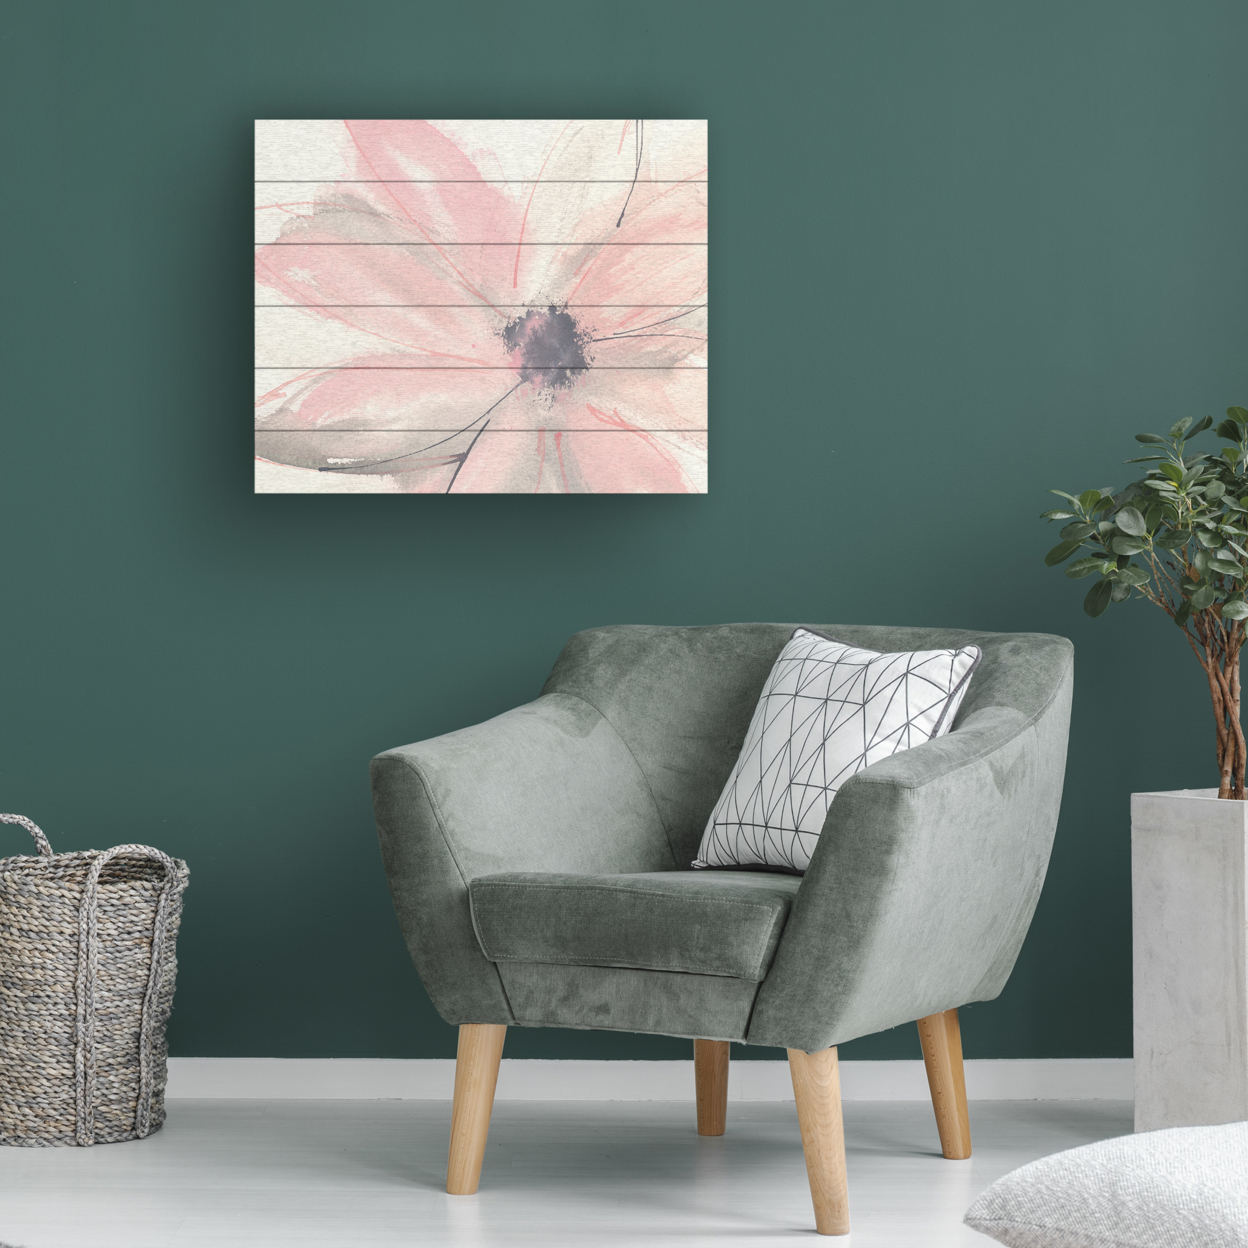 Wooden Slat Art 18 X 22 Inches Titled Blush Clematis I Ready To Hang Home Decor Picture